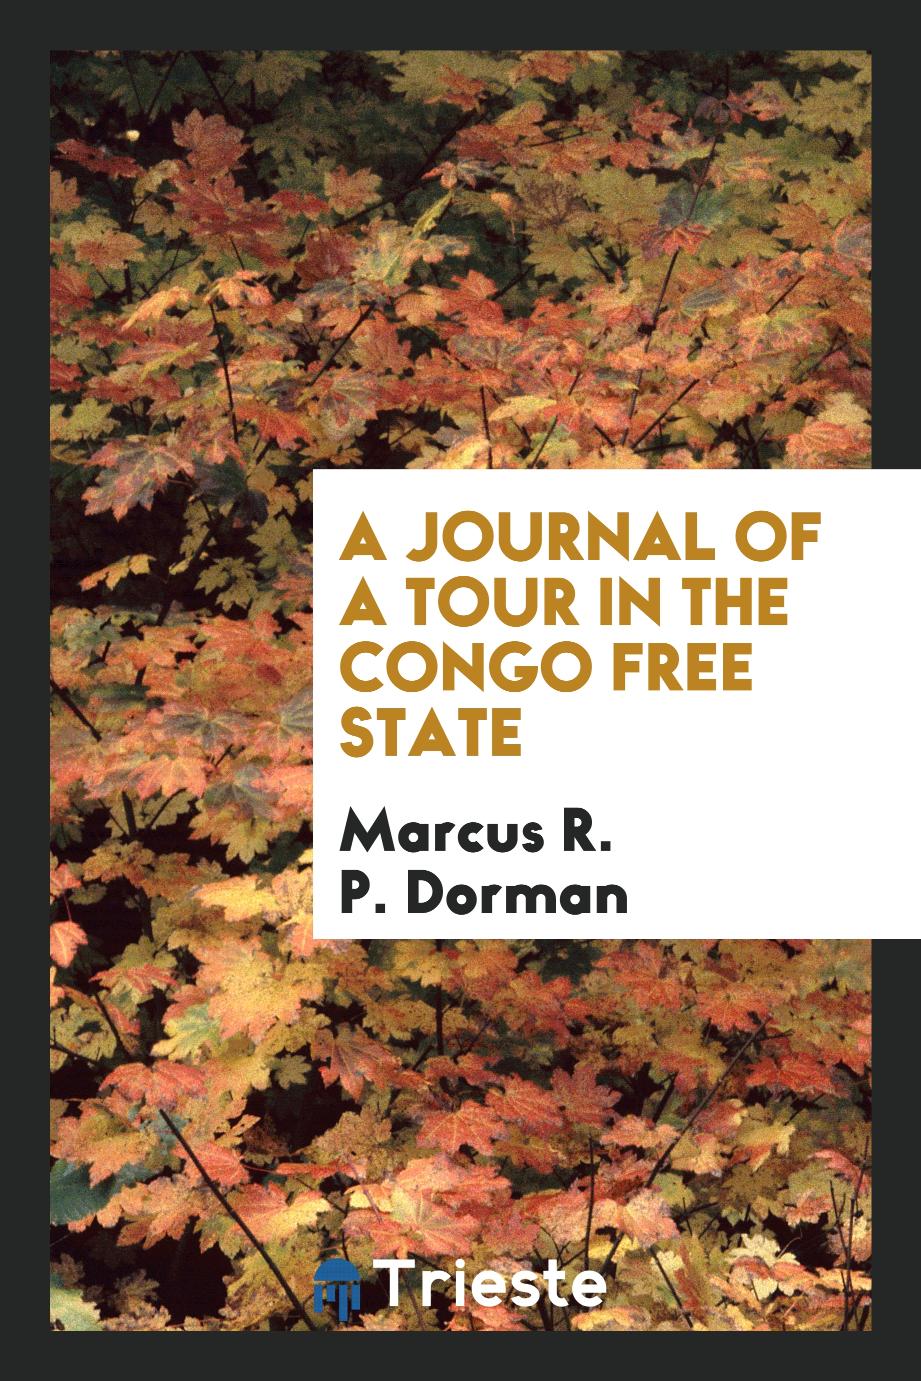 A journal of a tour in the Congo Free State